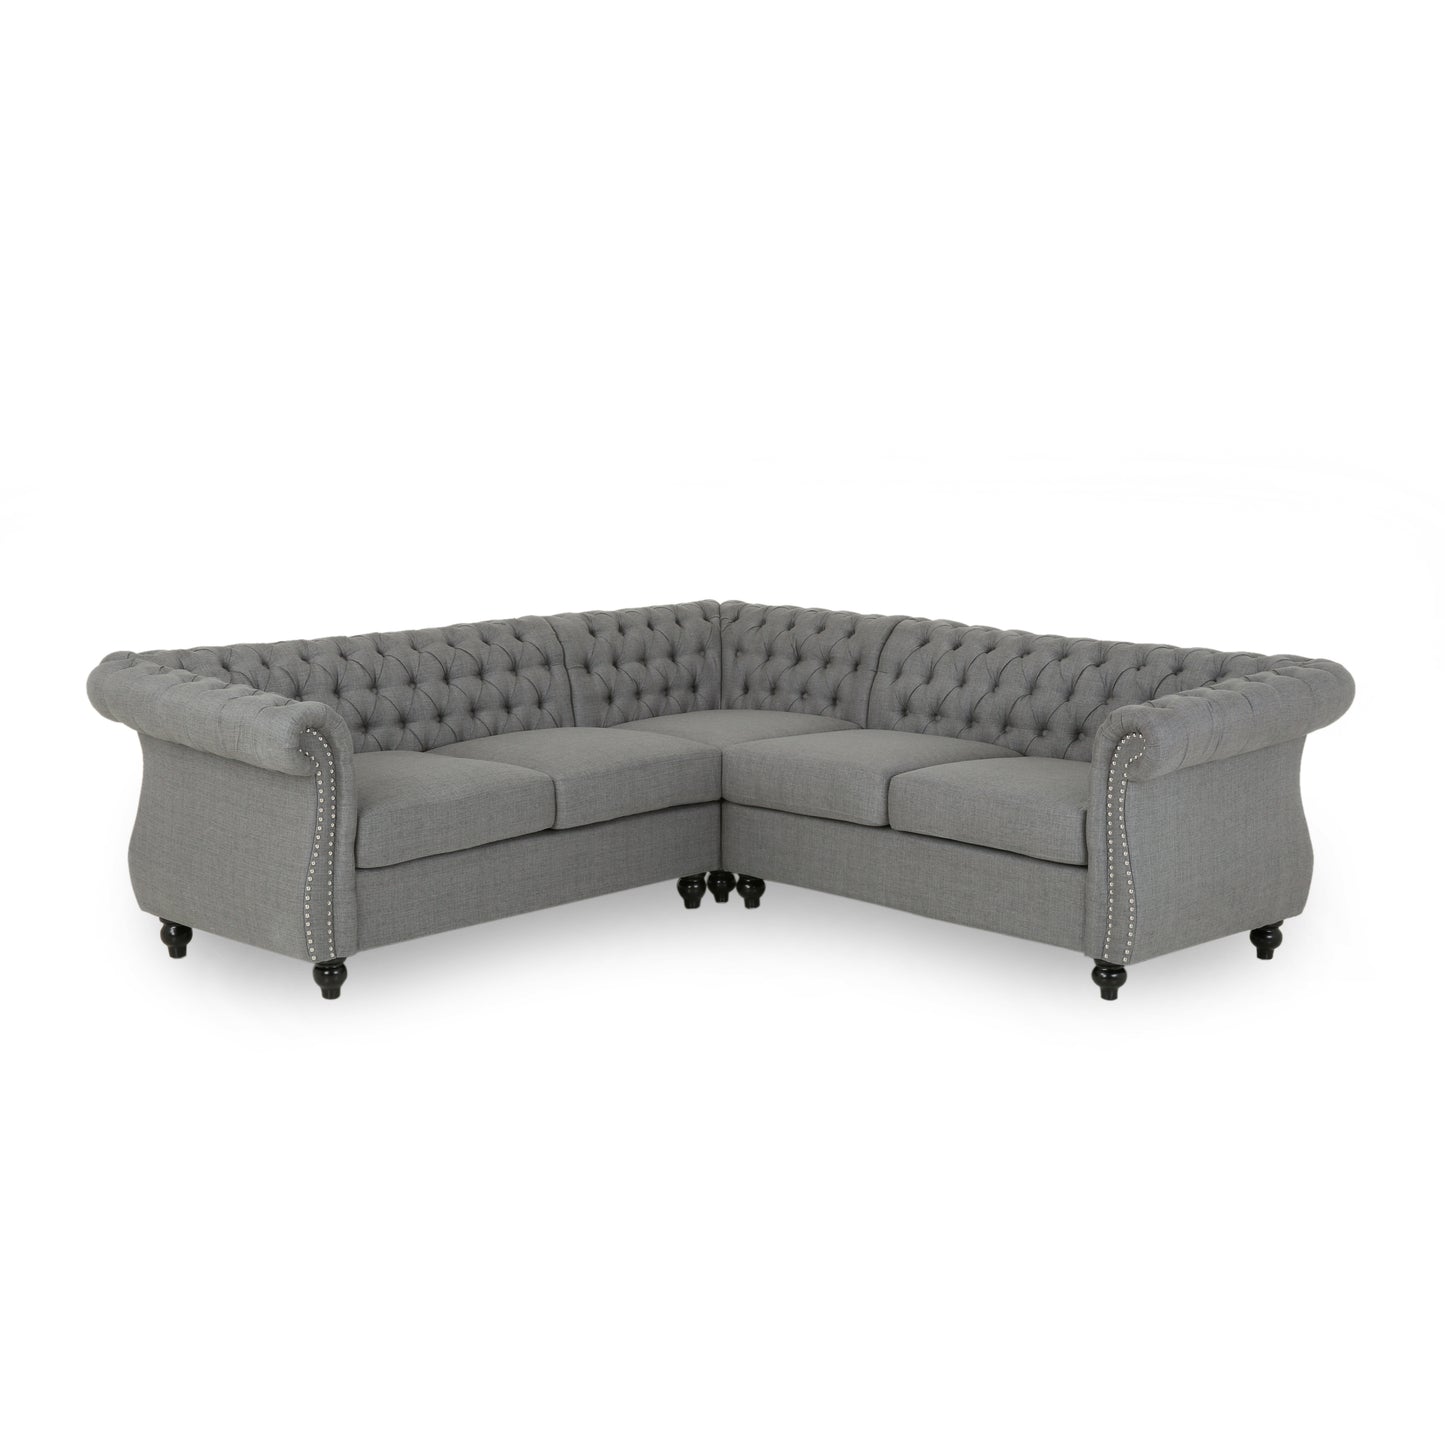 Rebecca 5 Seater Tufted Fabric Chesterfield Sectional